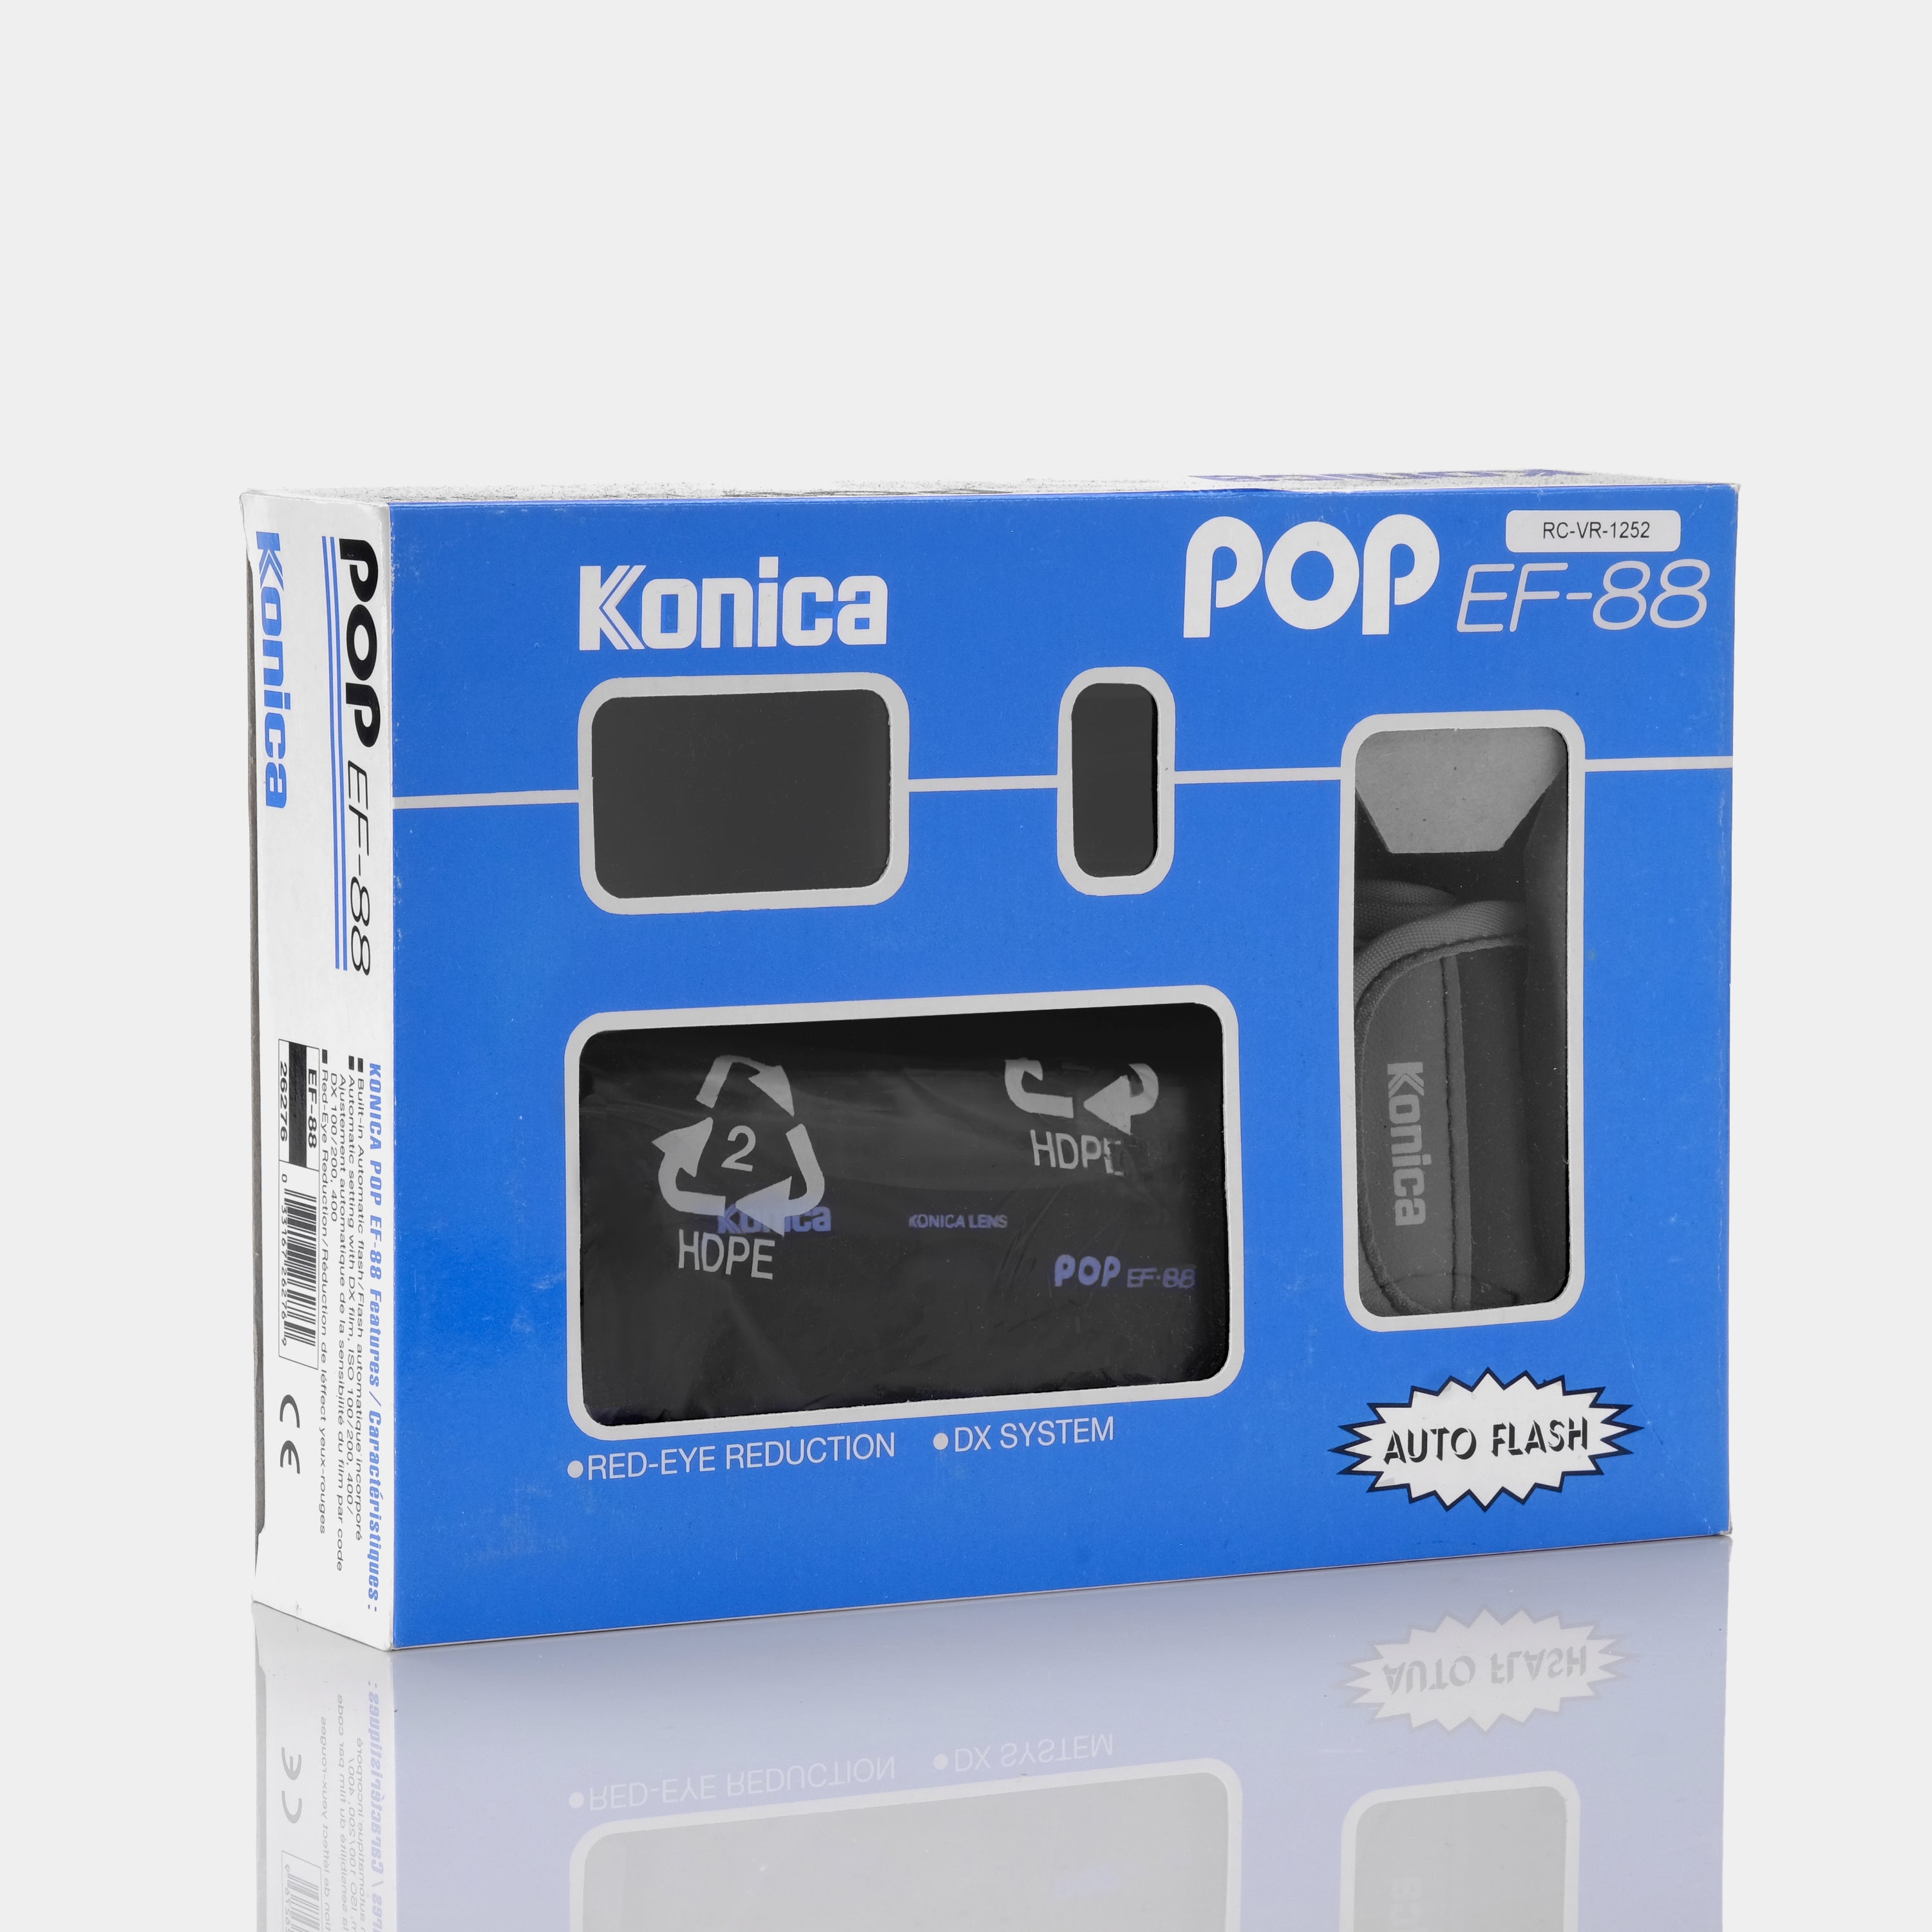 Konica POP EF-88 35mm Point And Shoot Film Camera (New Old Stock)